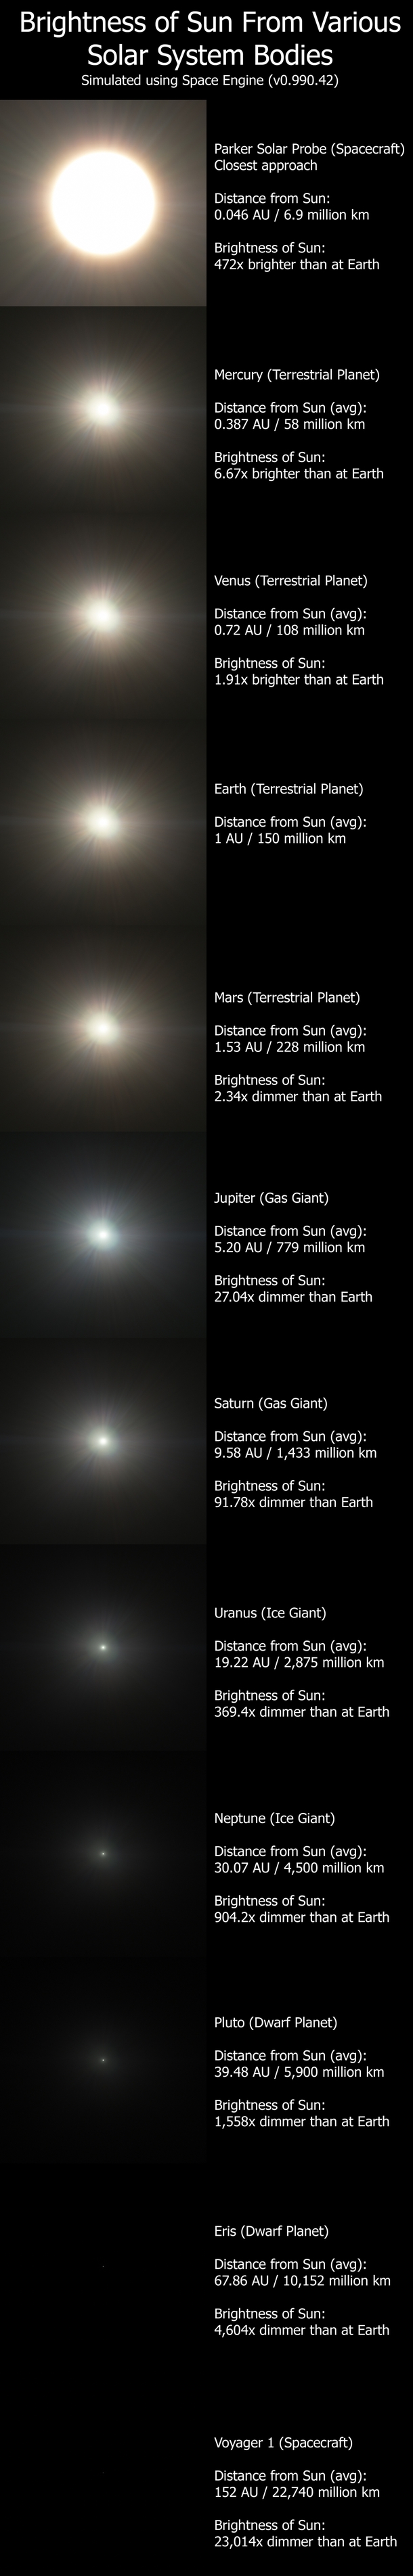 Brightness of Sun From Various Solar System Bodies 